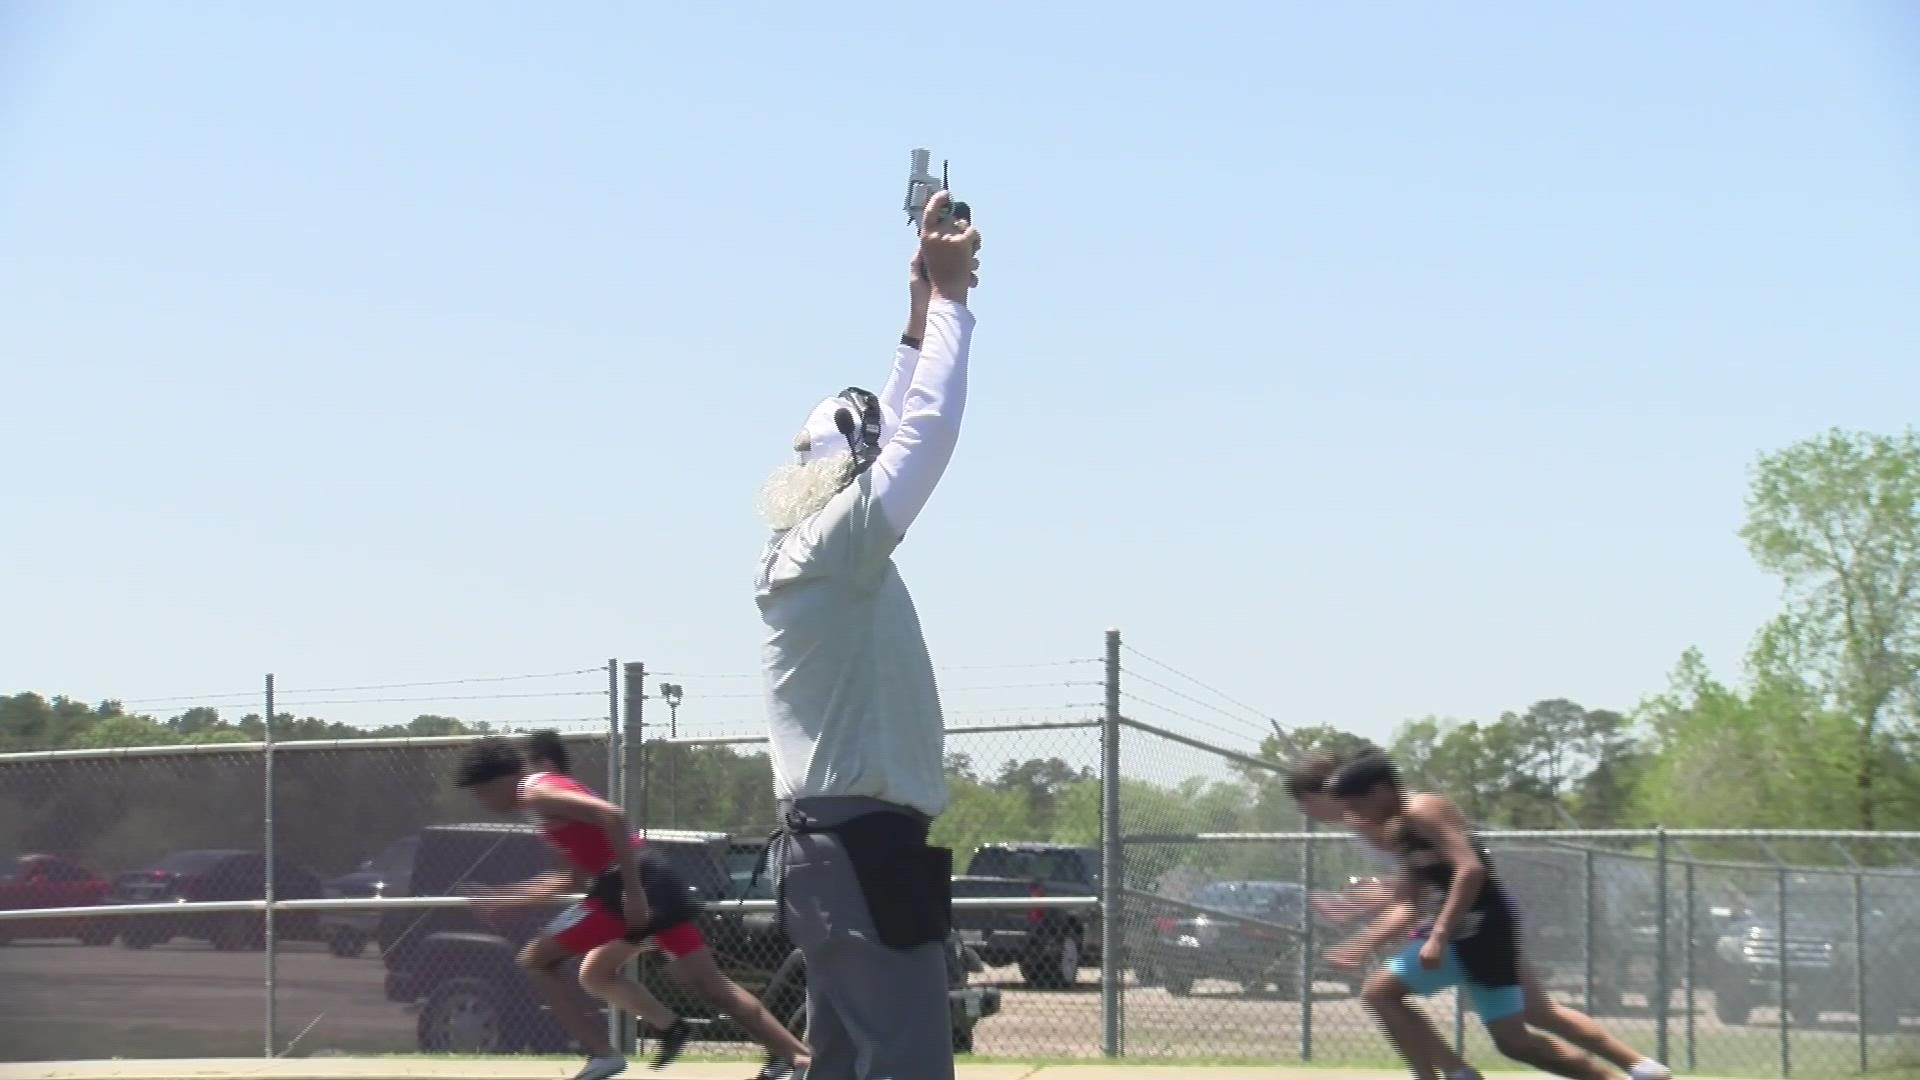 The District 15-5A track meet took place Thursday at Bobcat stadium in Hallsville. CBS19 sports anchor Ashley Moore was there to catch some of the action.